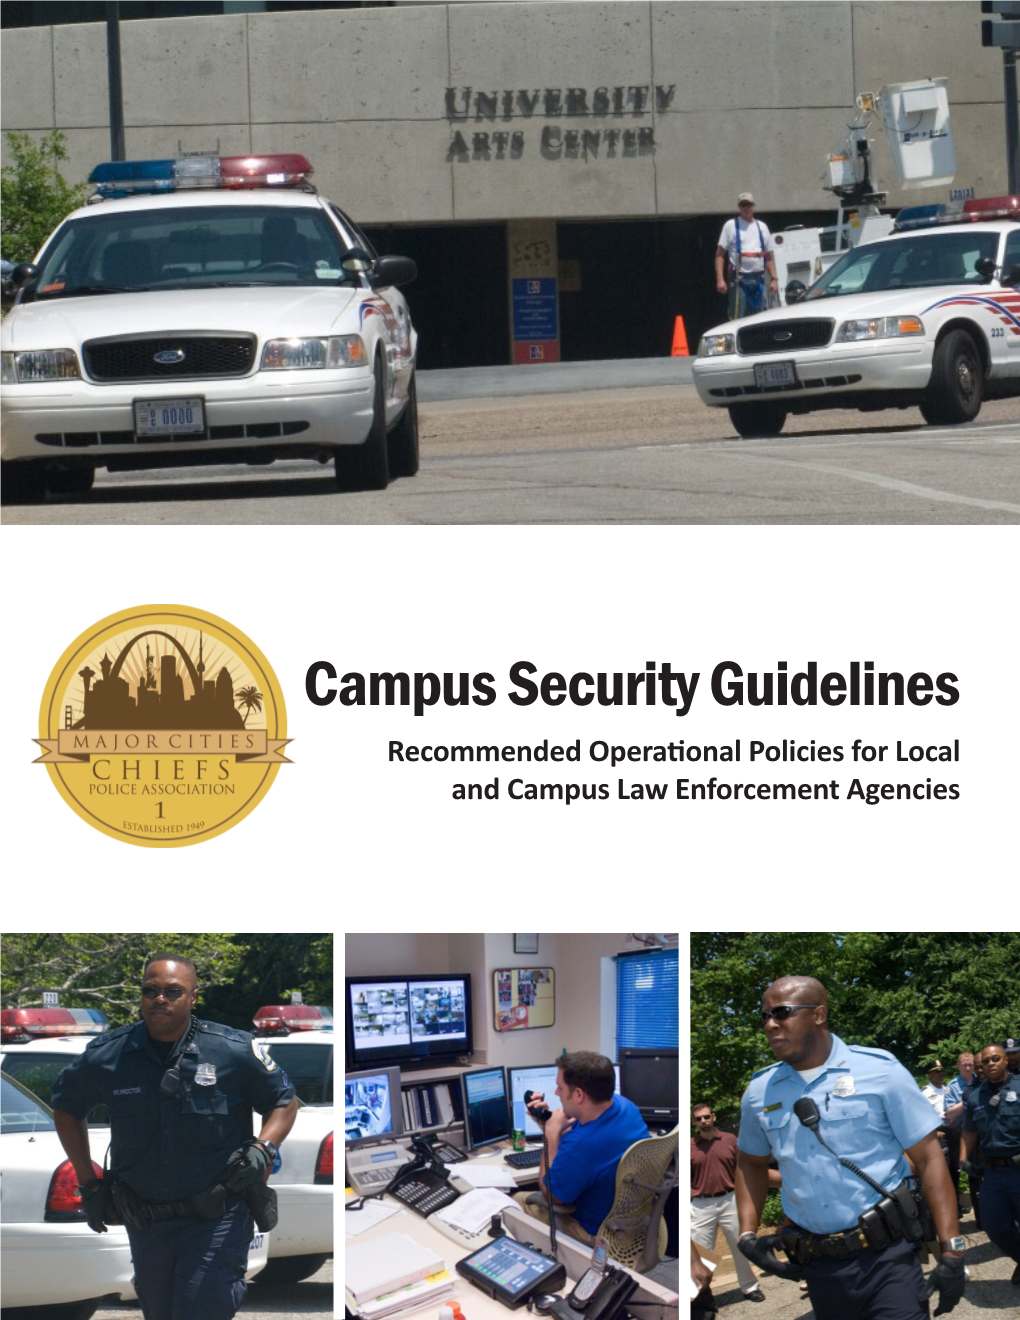 Campus Security Guidelines Recommended Operational Policies for Local and Campus Law Enforcement Agencies